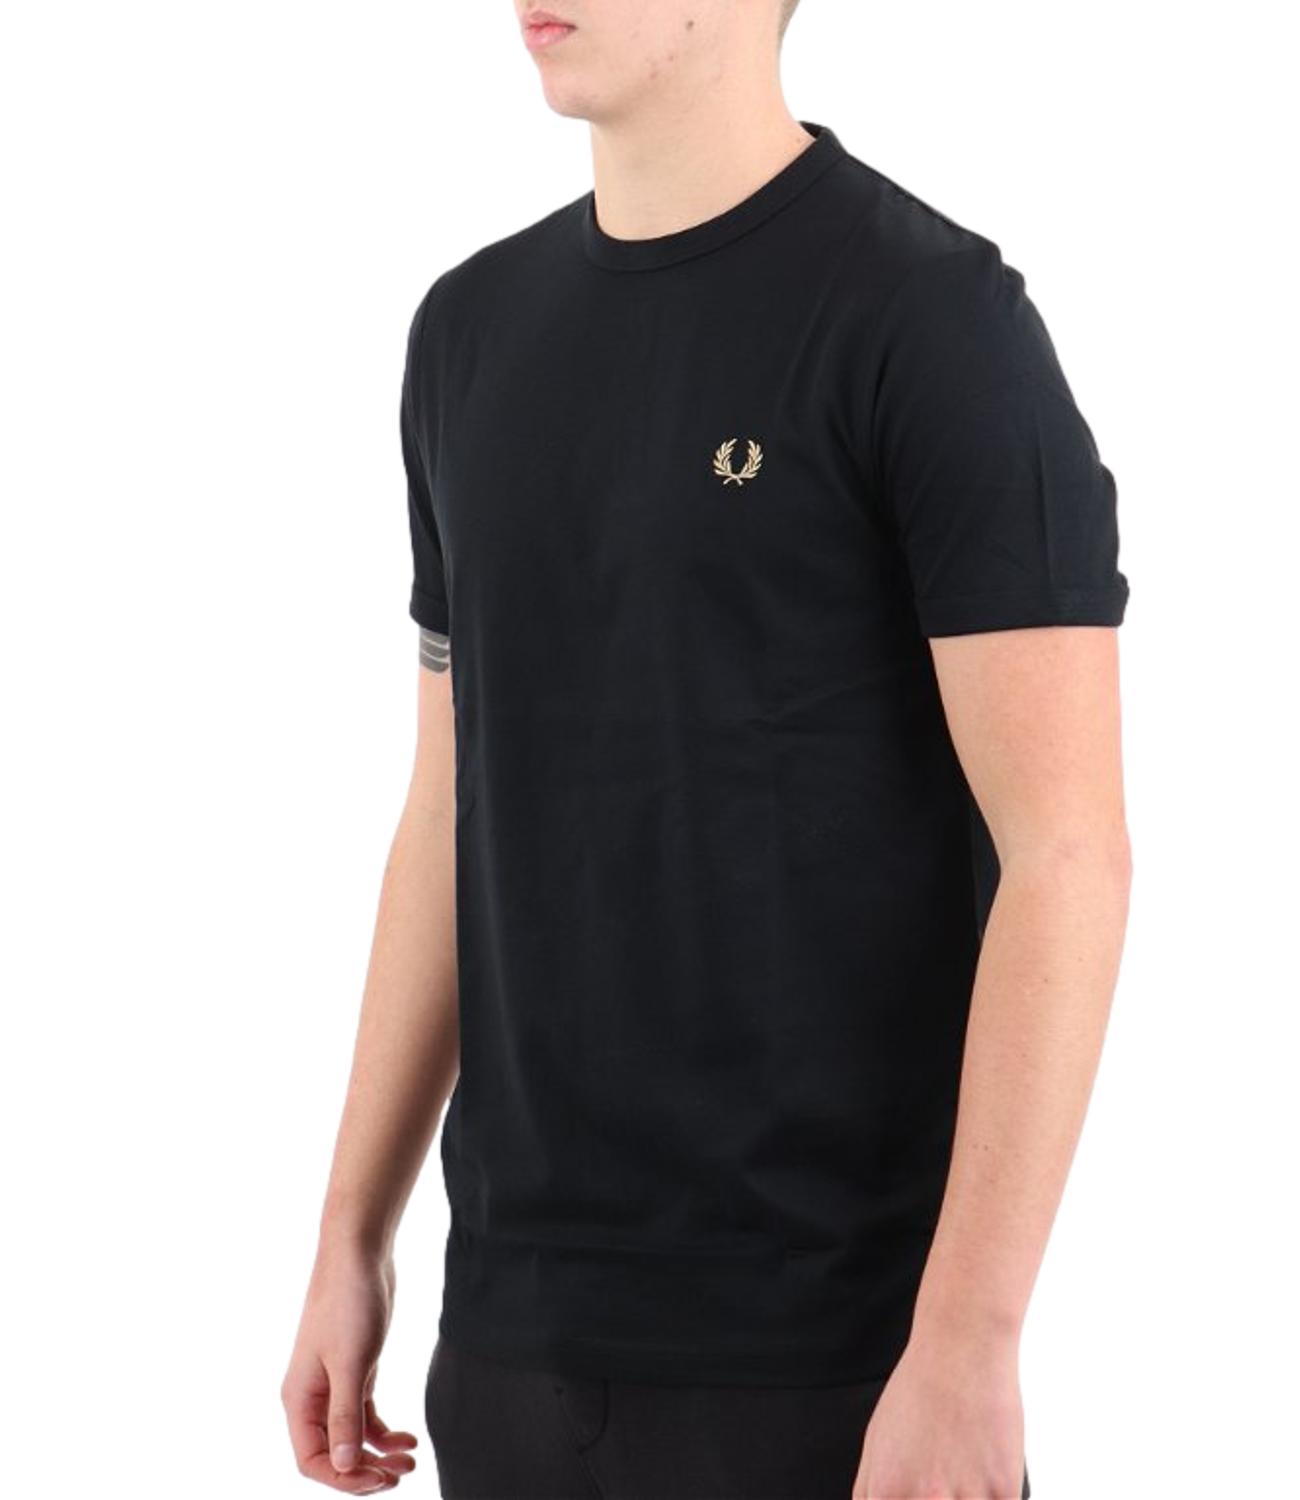 Fred Perry t-shirt nera uomo ringer